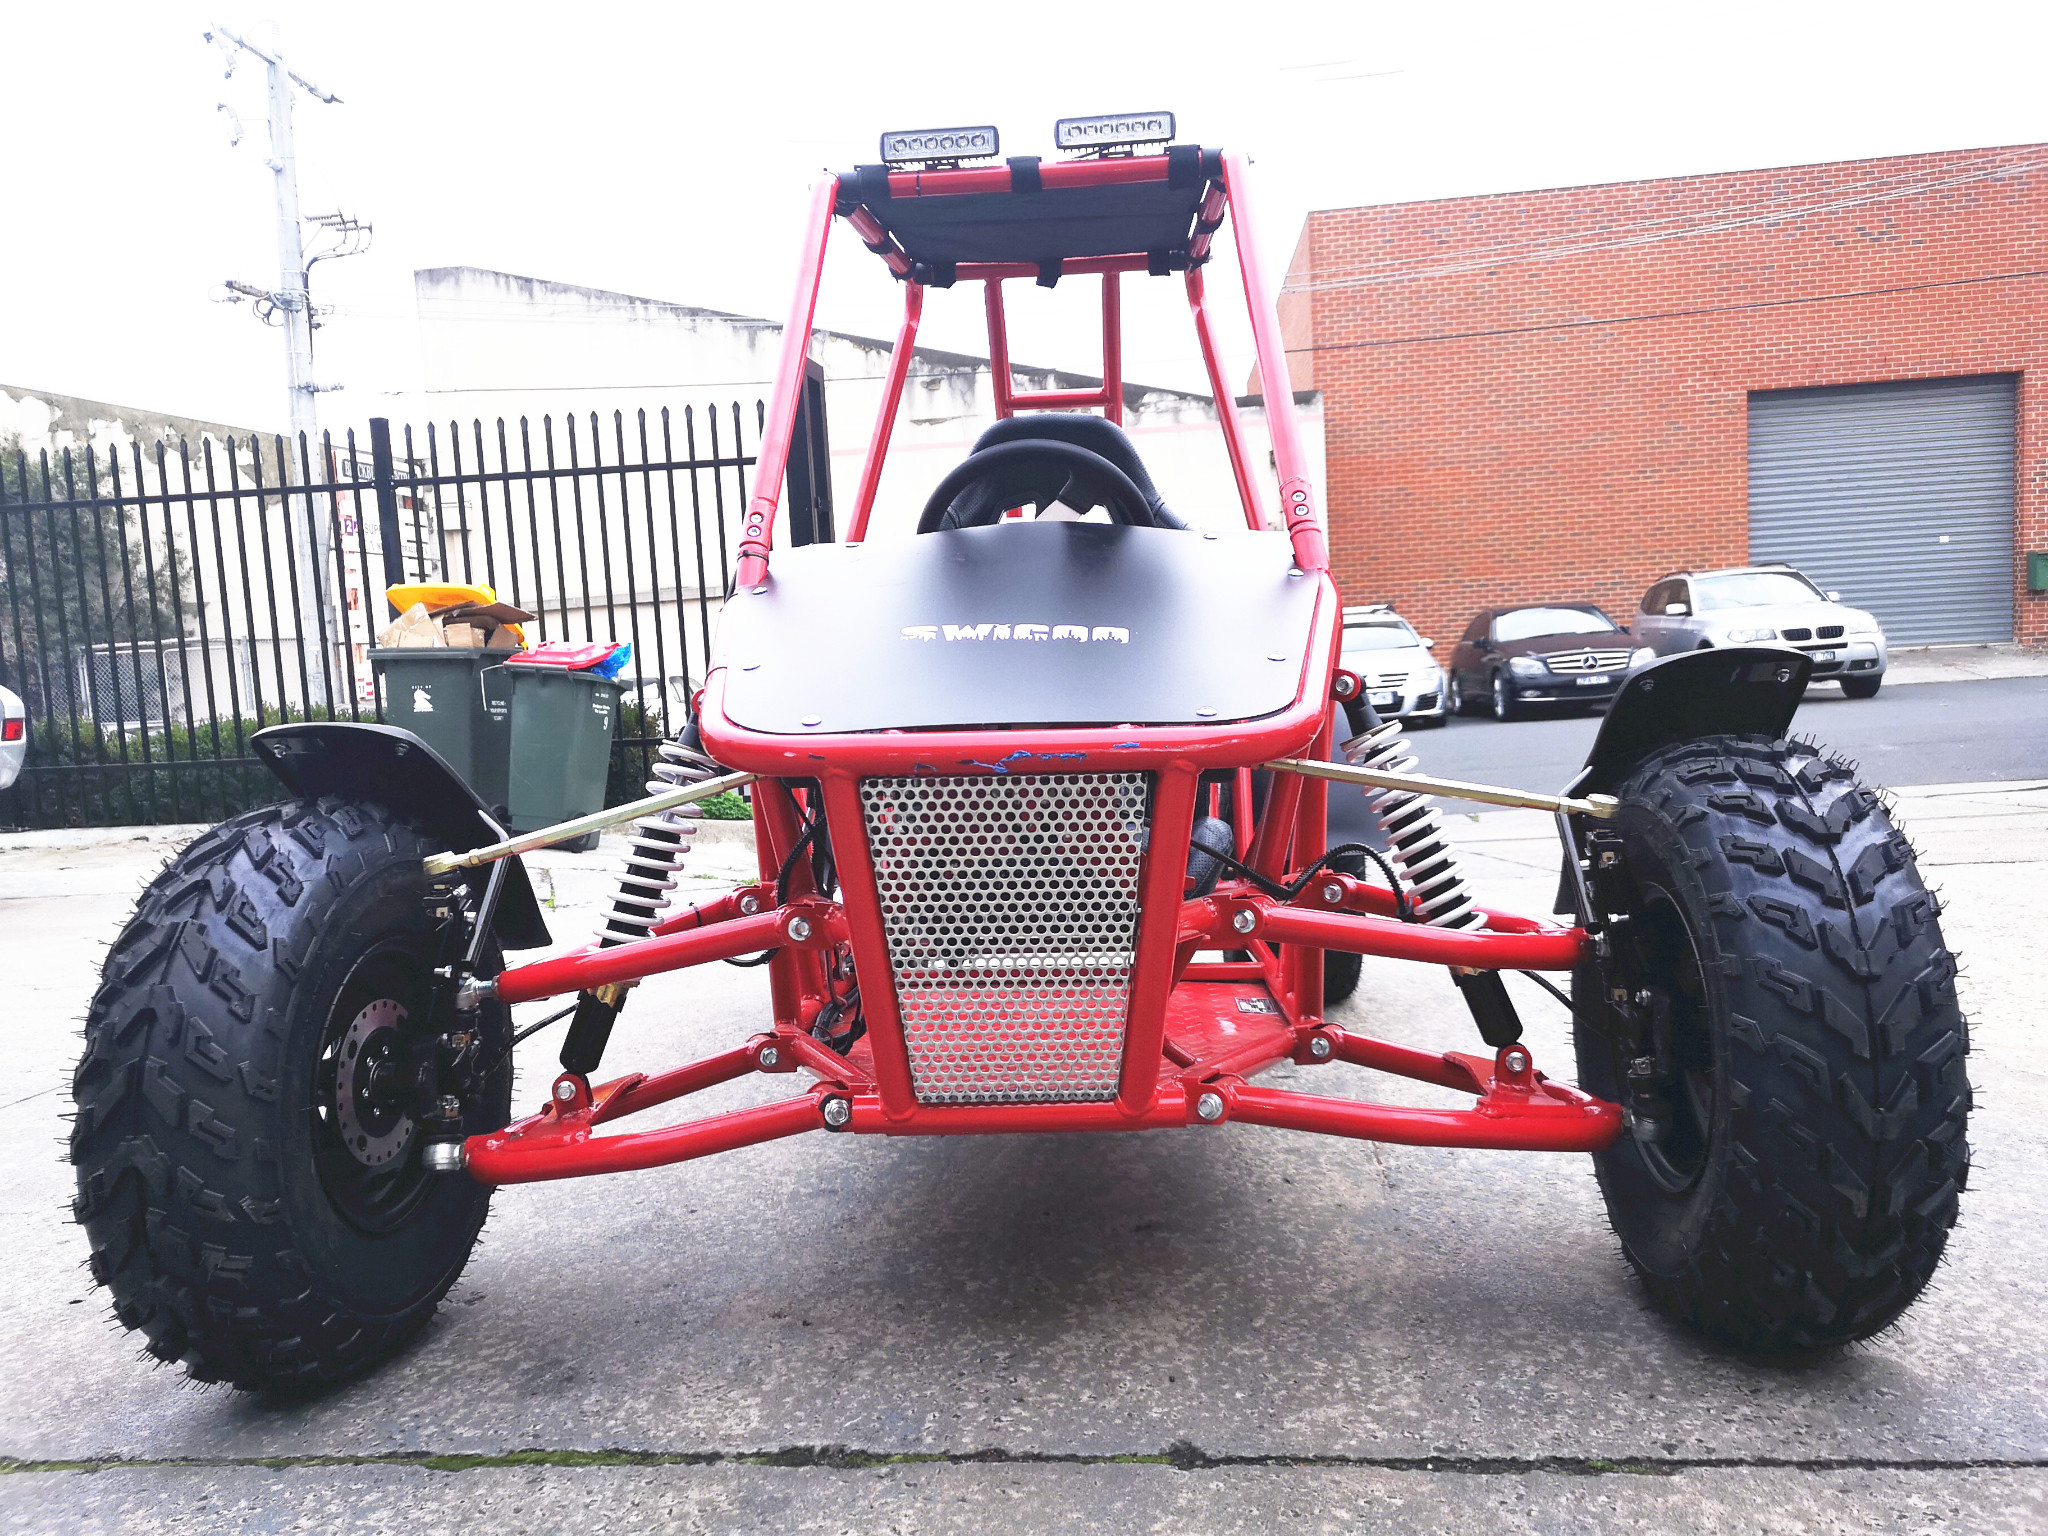 Gallery of 4 Seat Dune Buggy.